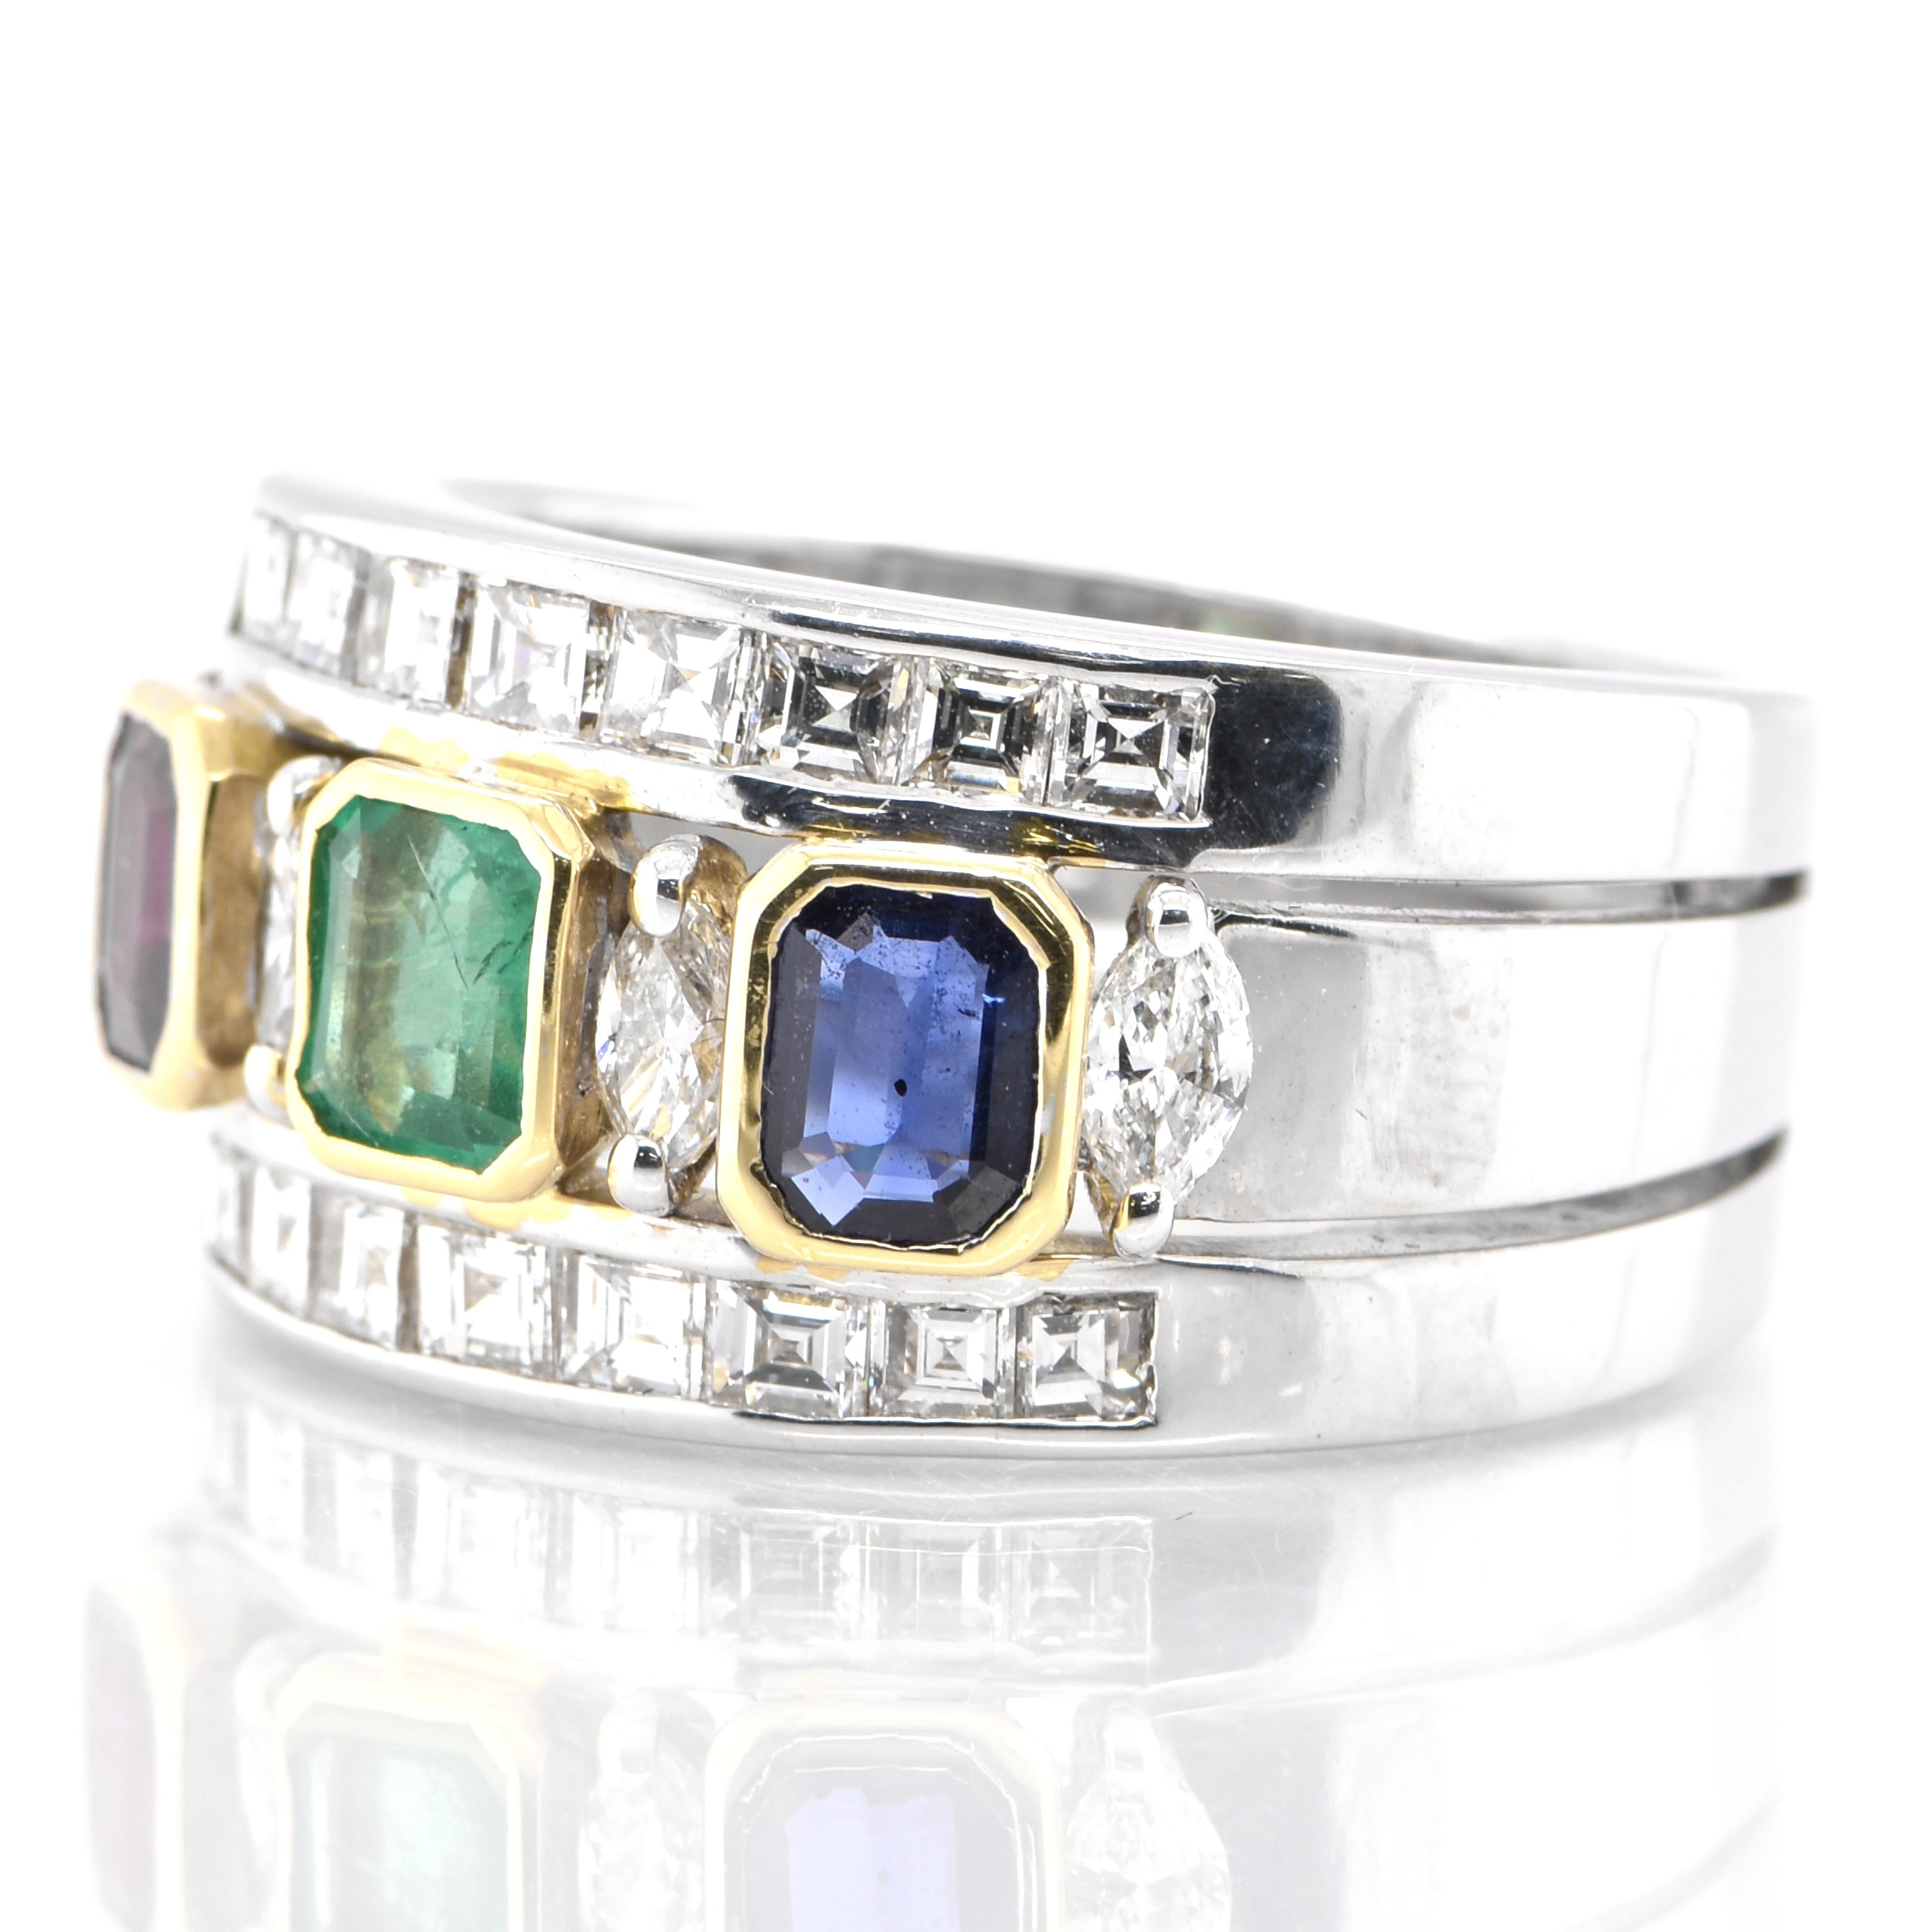 A stunning band ring featuring a total of 1.48 carats of Natural Emerald, Ruby and Sapphire and 1.33 Carats of Diamond Accents set in 18 Karat White Gold. People have admired emerald’s green for thousands of years. Emeralds have always been